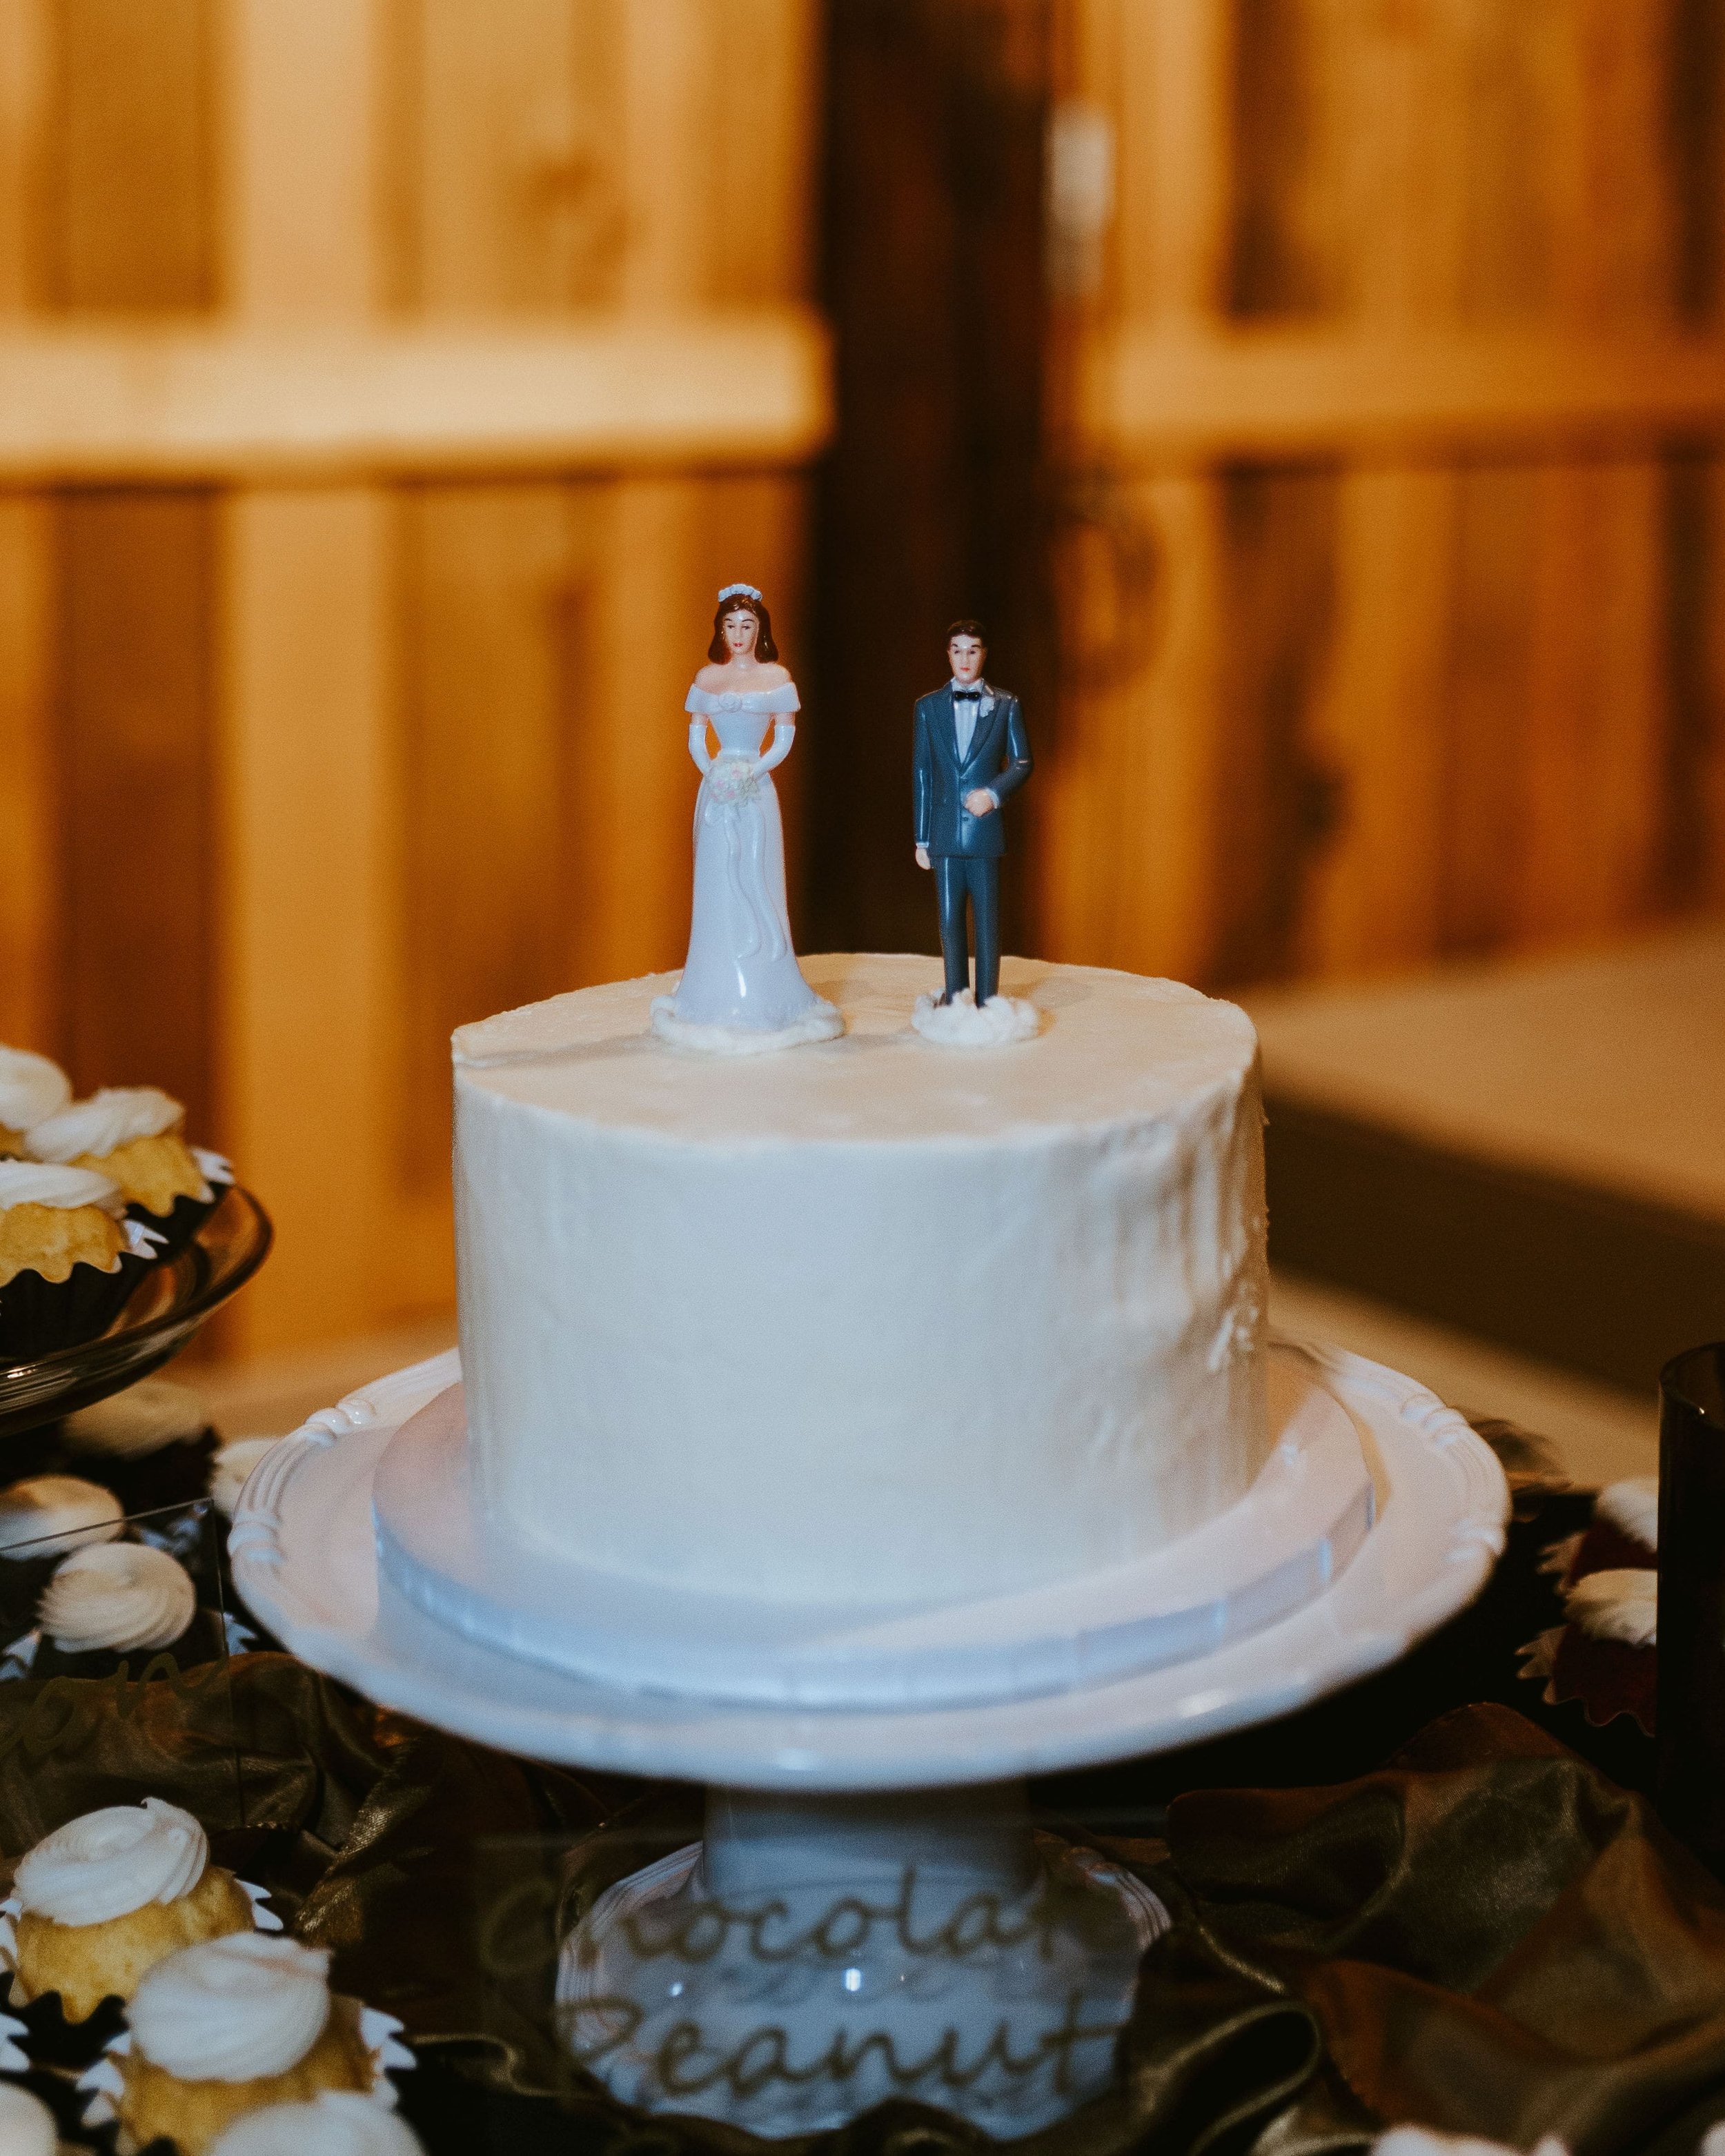 White frosted wedding cake with bride and groom cake toppers